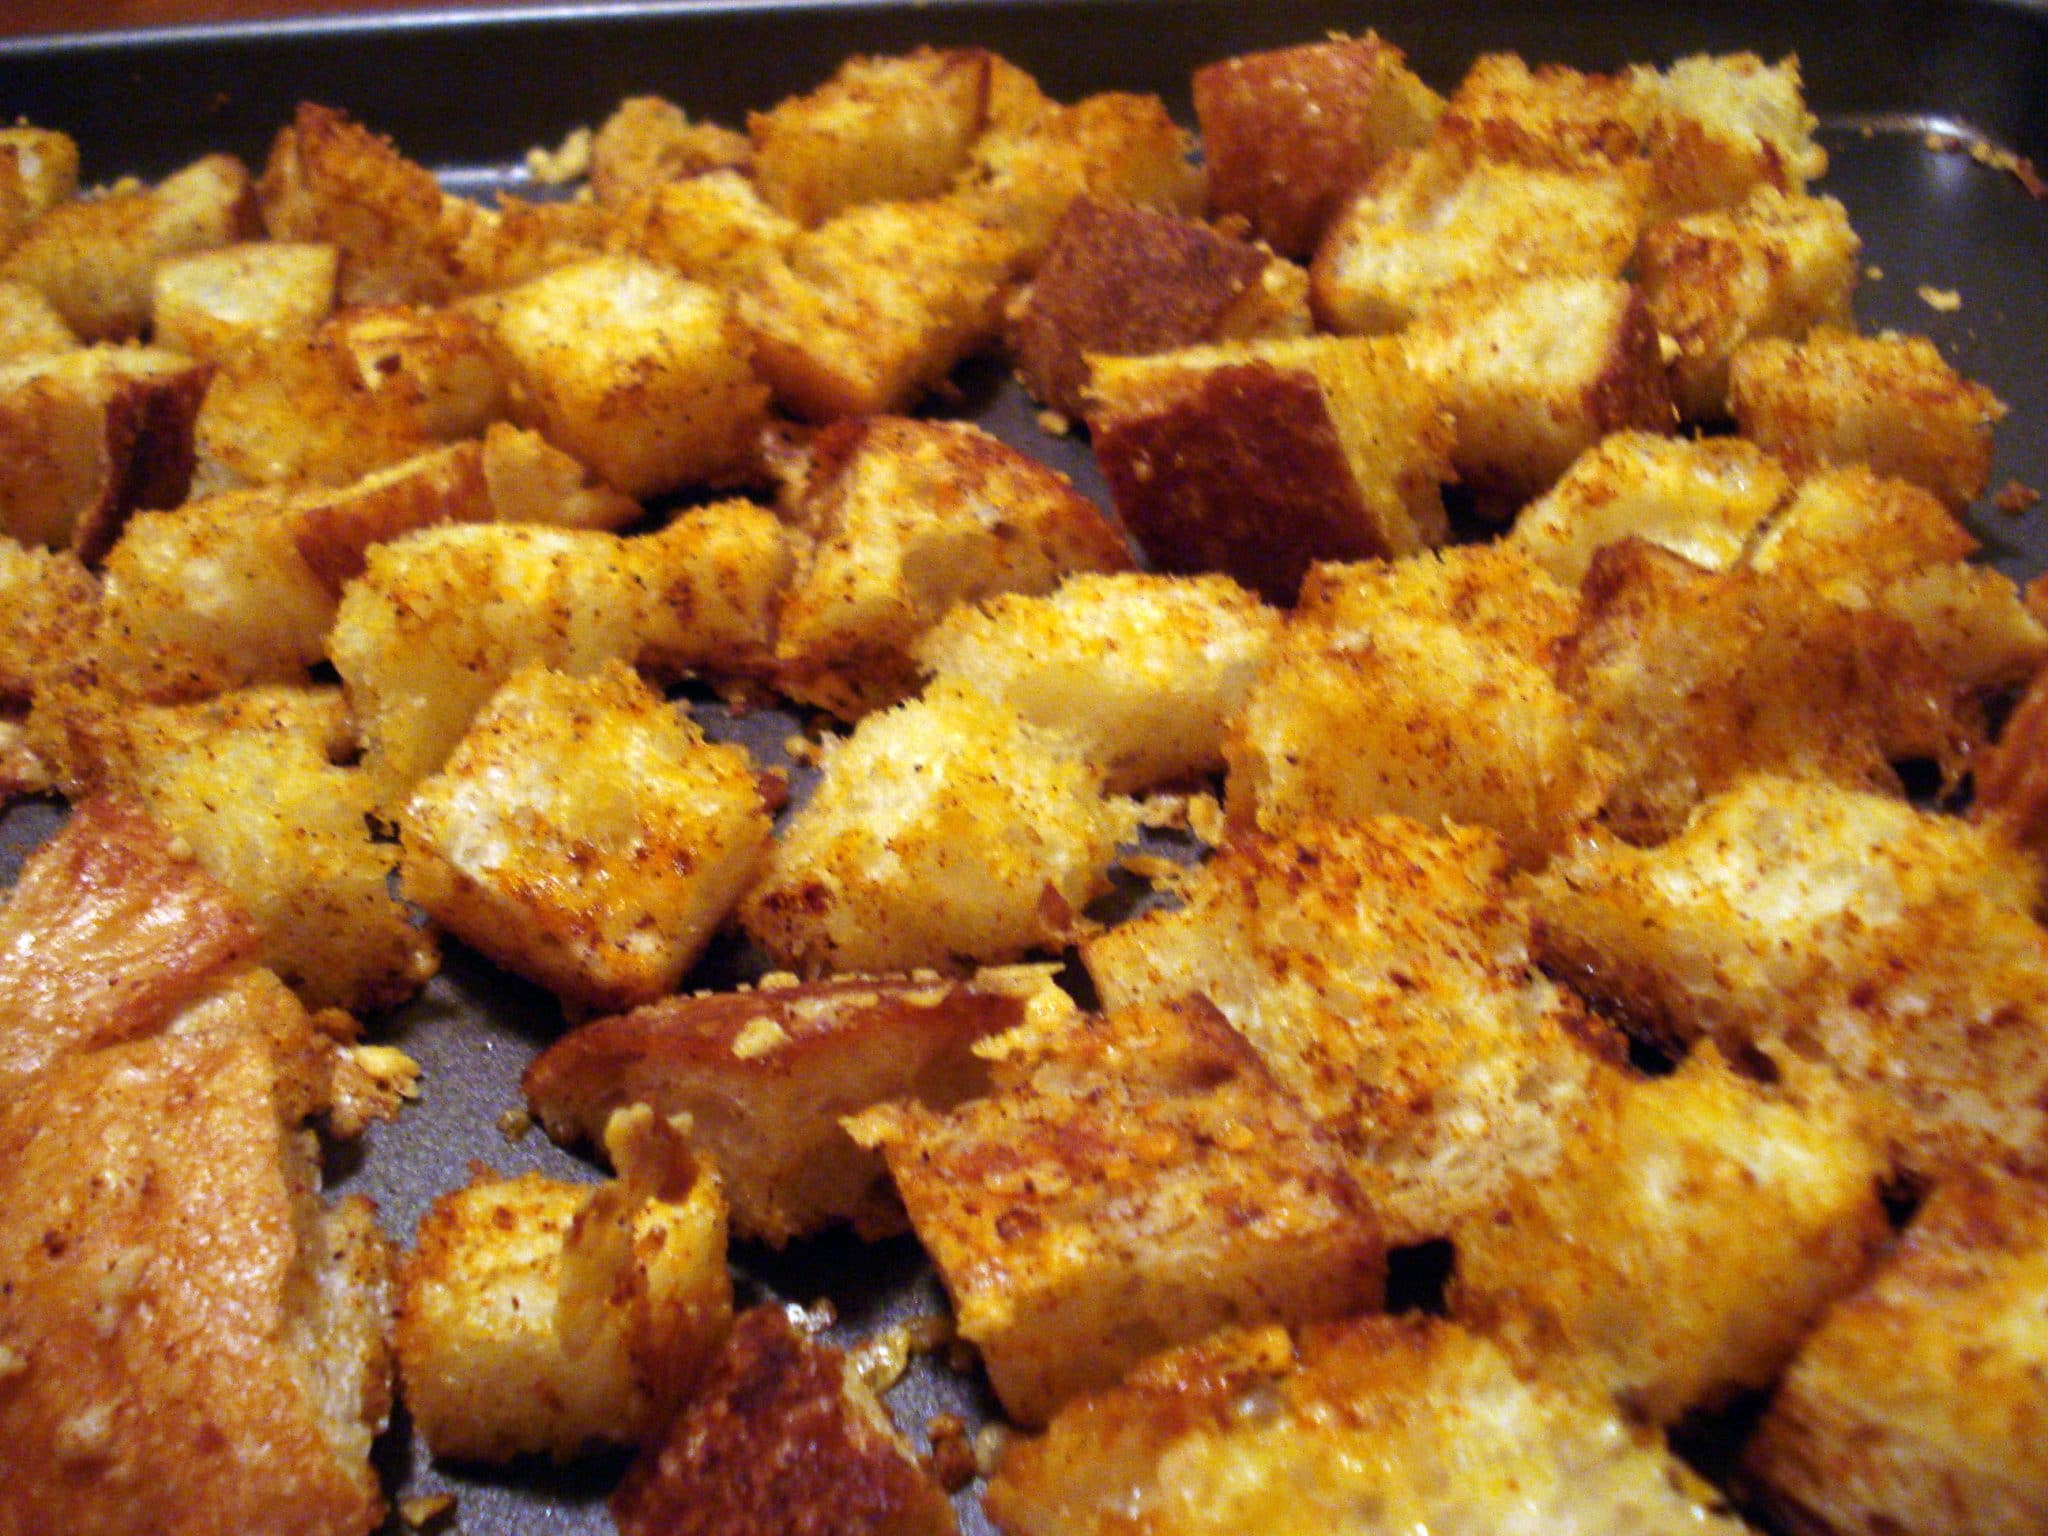 Croutons cooking